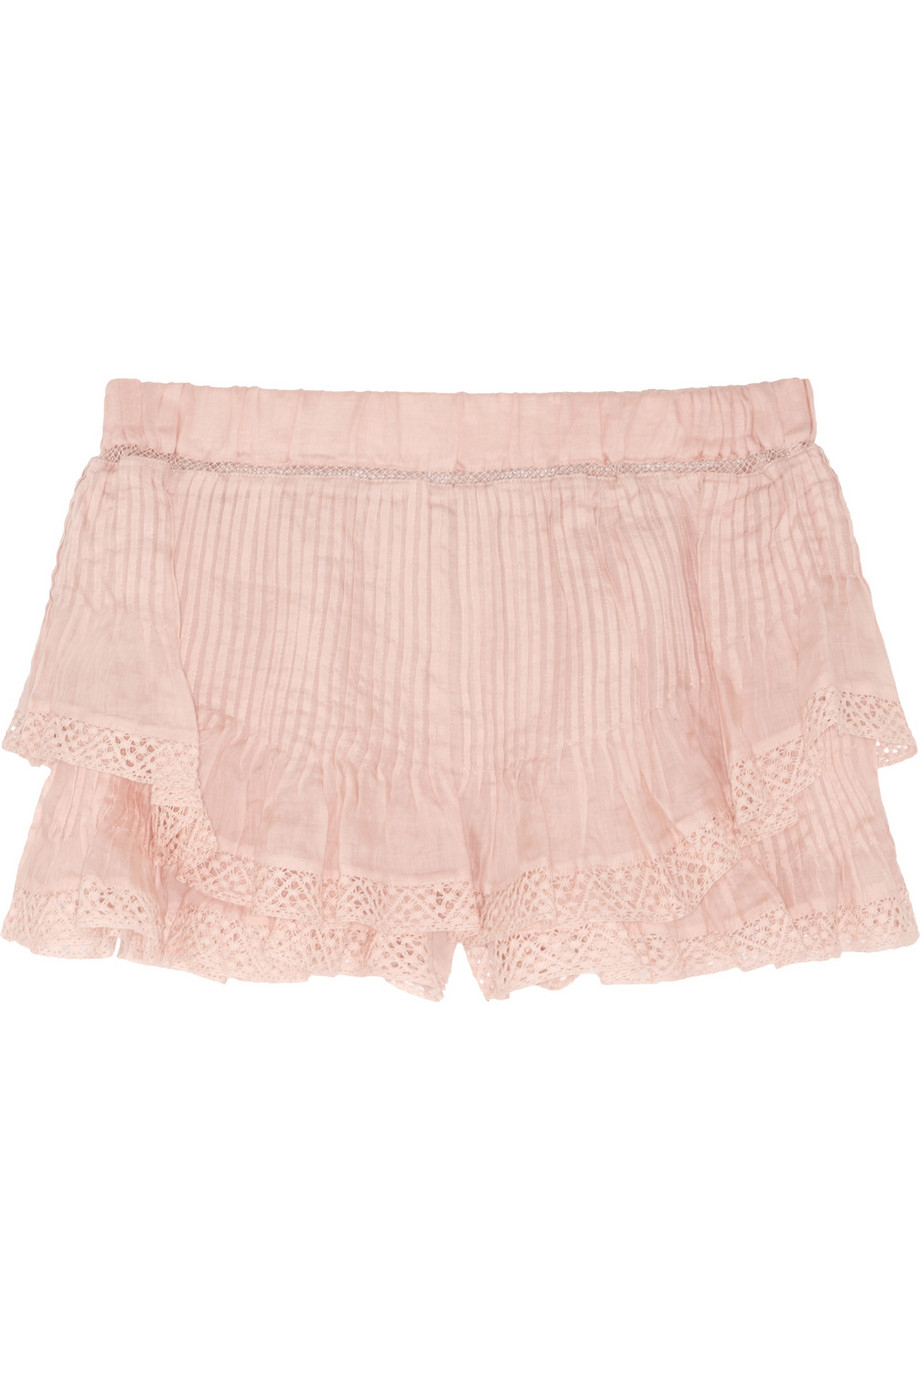 Lyst - Isabel marant Oriane Lacetrimmed Pleated Ramie Shorts in Pink